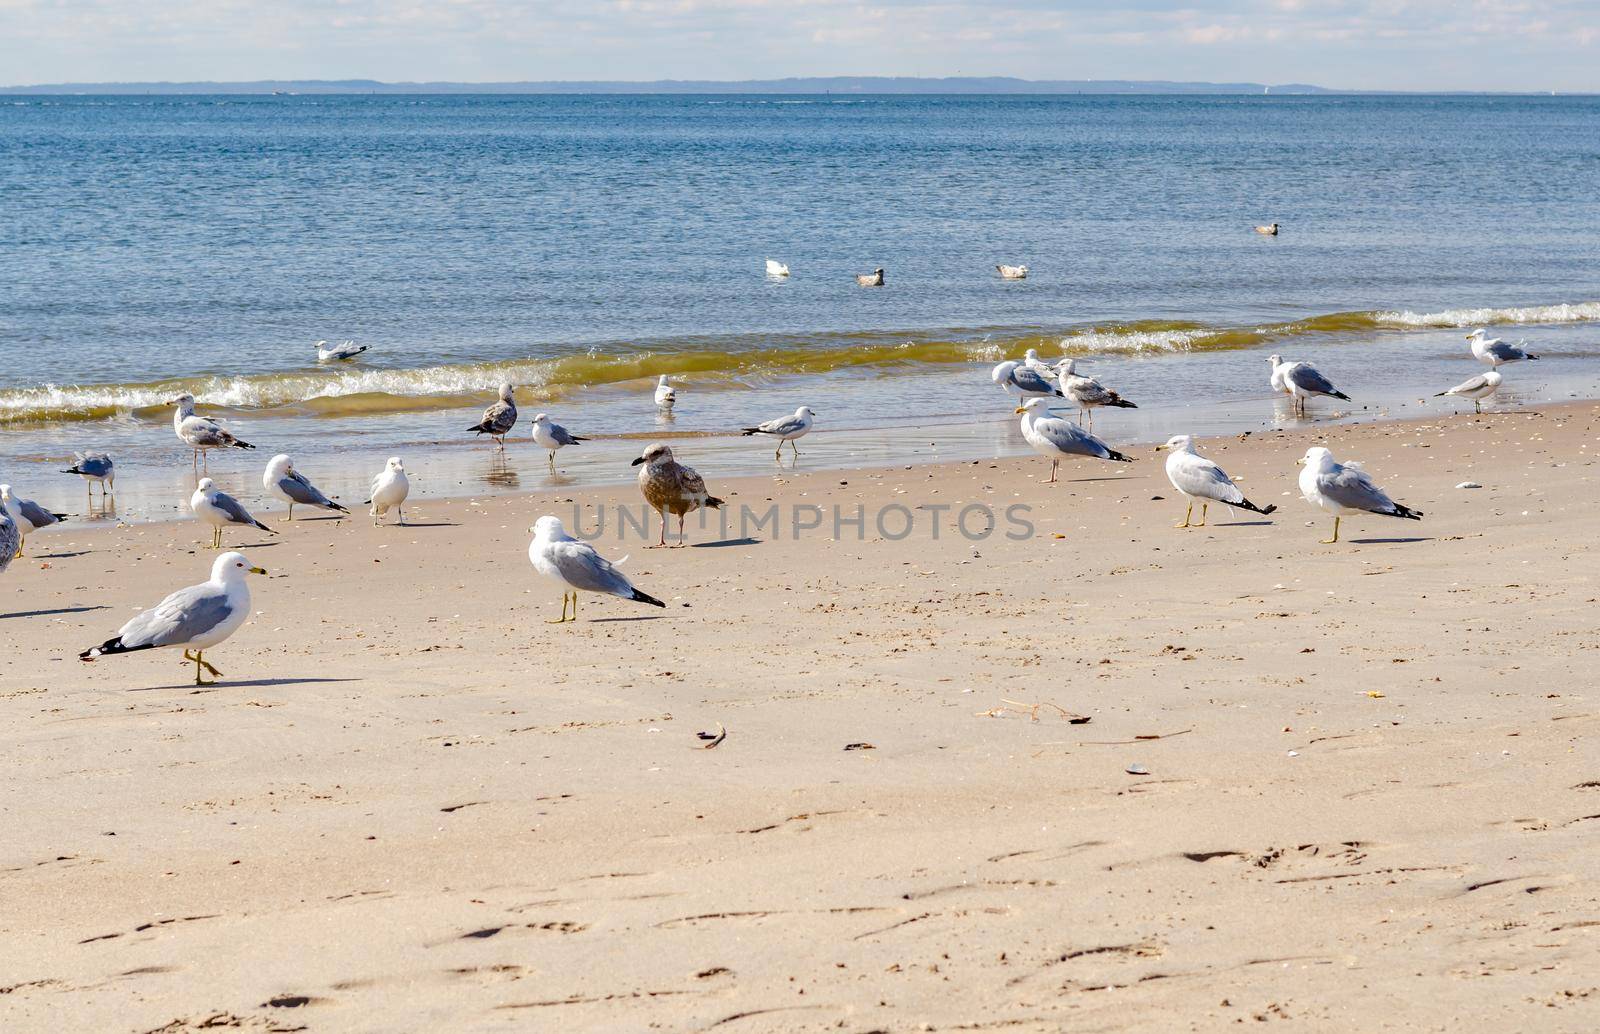 Seagulls at the Beach of Coney island next to the ocean, close-up, Brooklyn, New York City during winter day with cloudy sky, Island in the distance at the horizon, horizontal